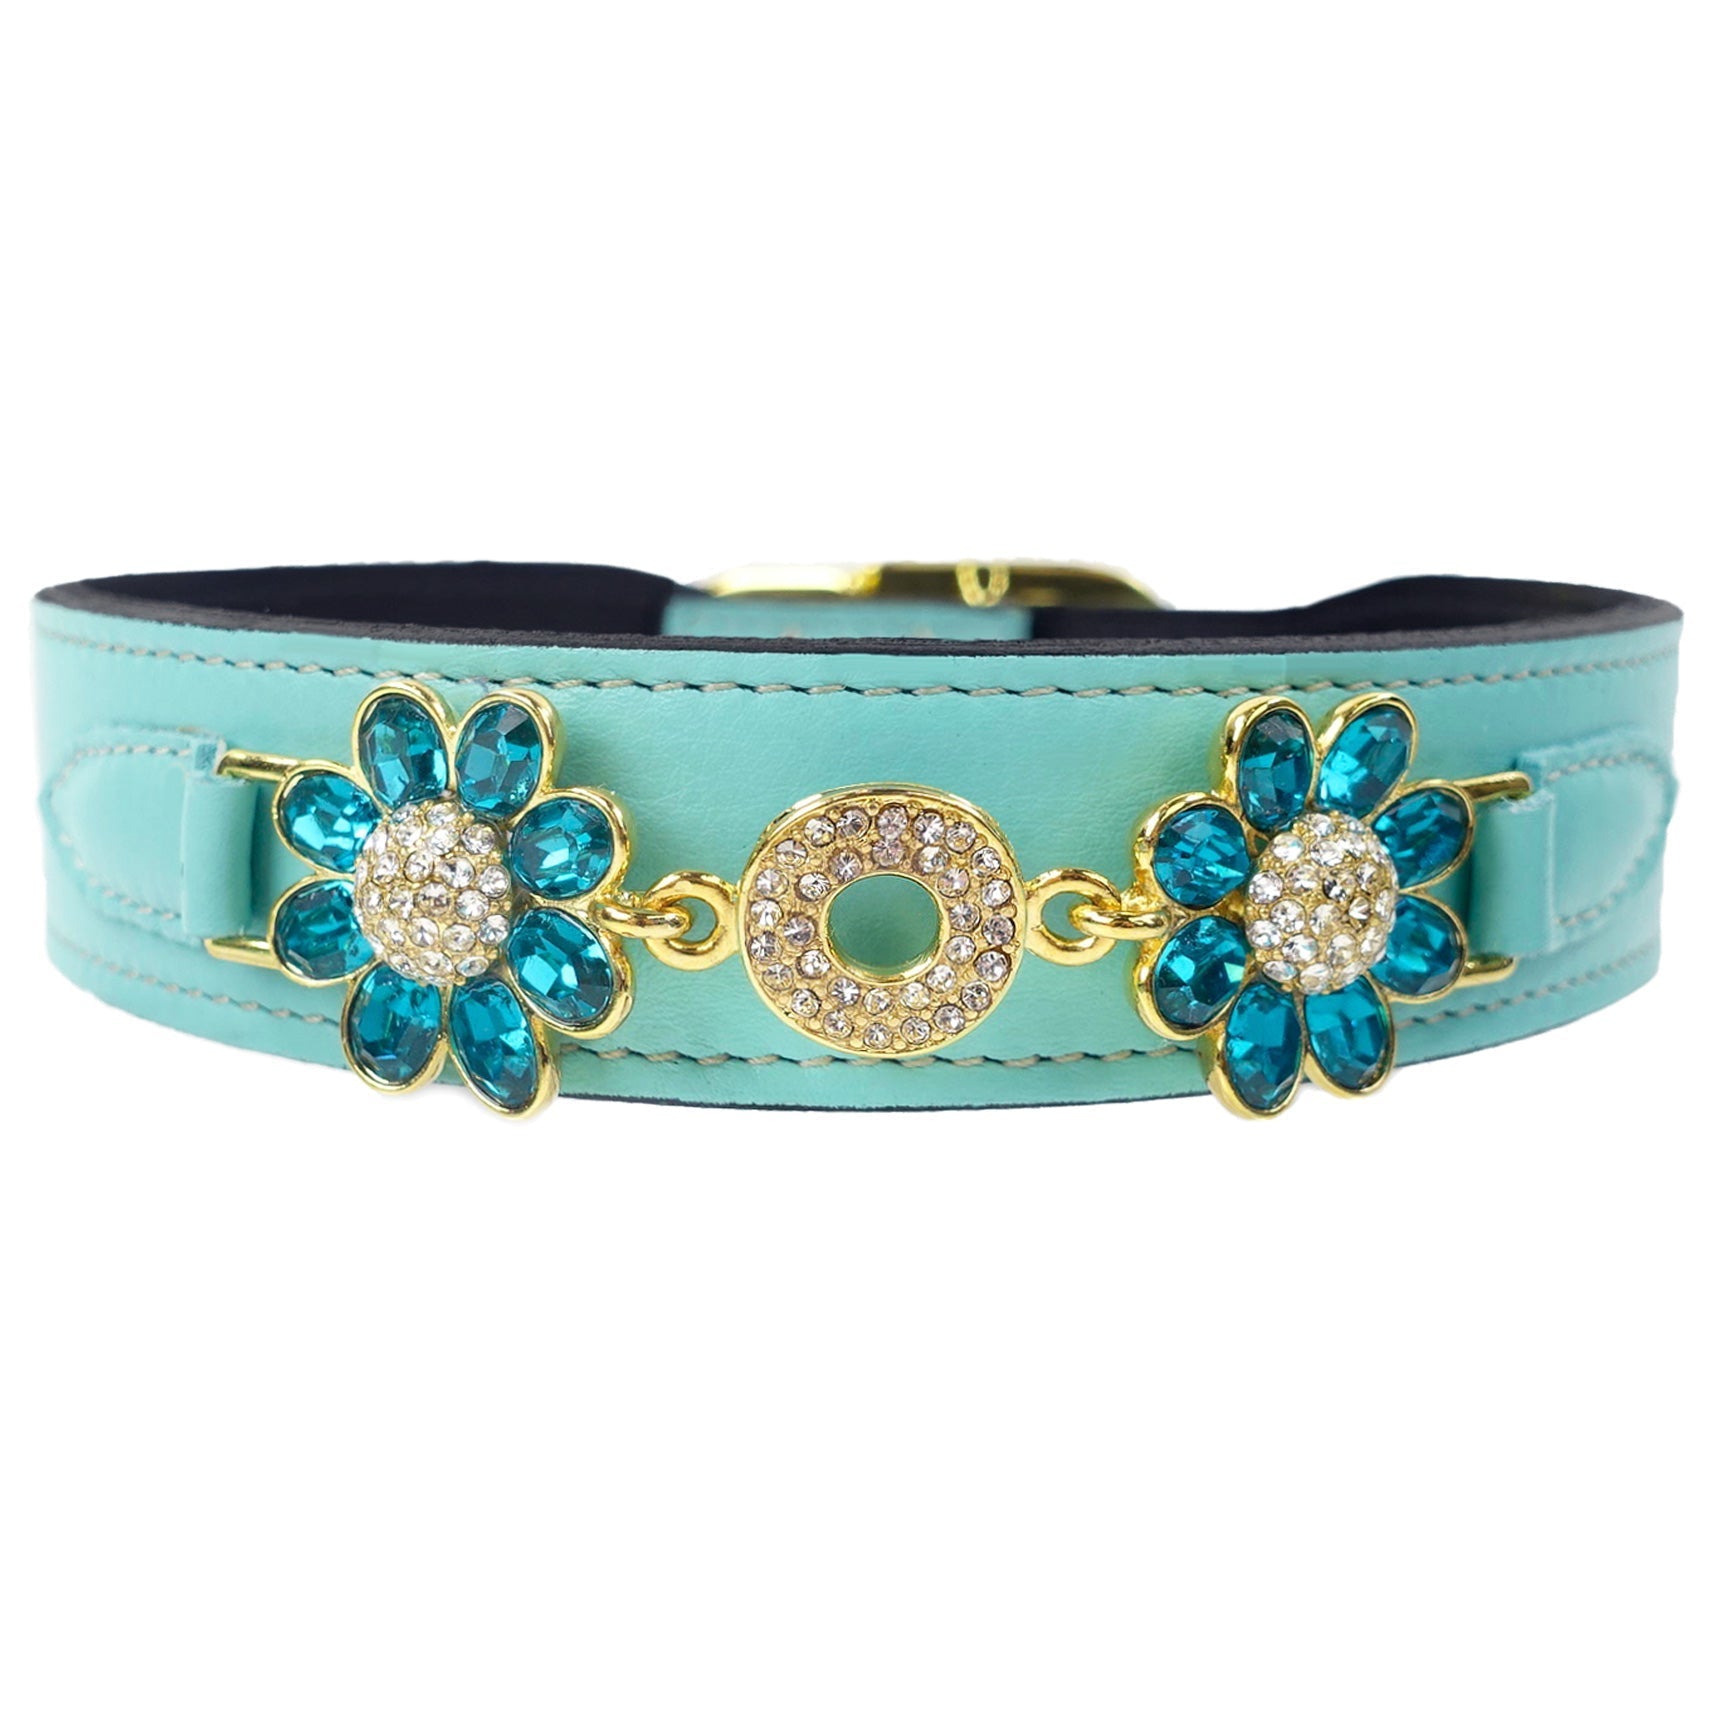 Daisy in Turquoise & Gold